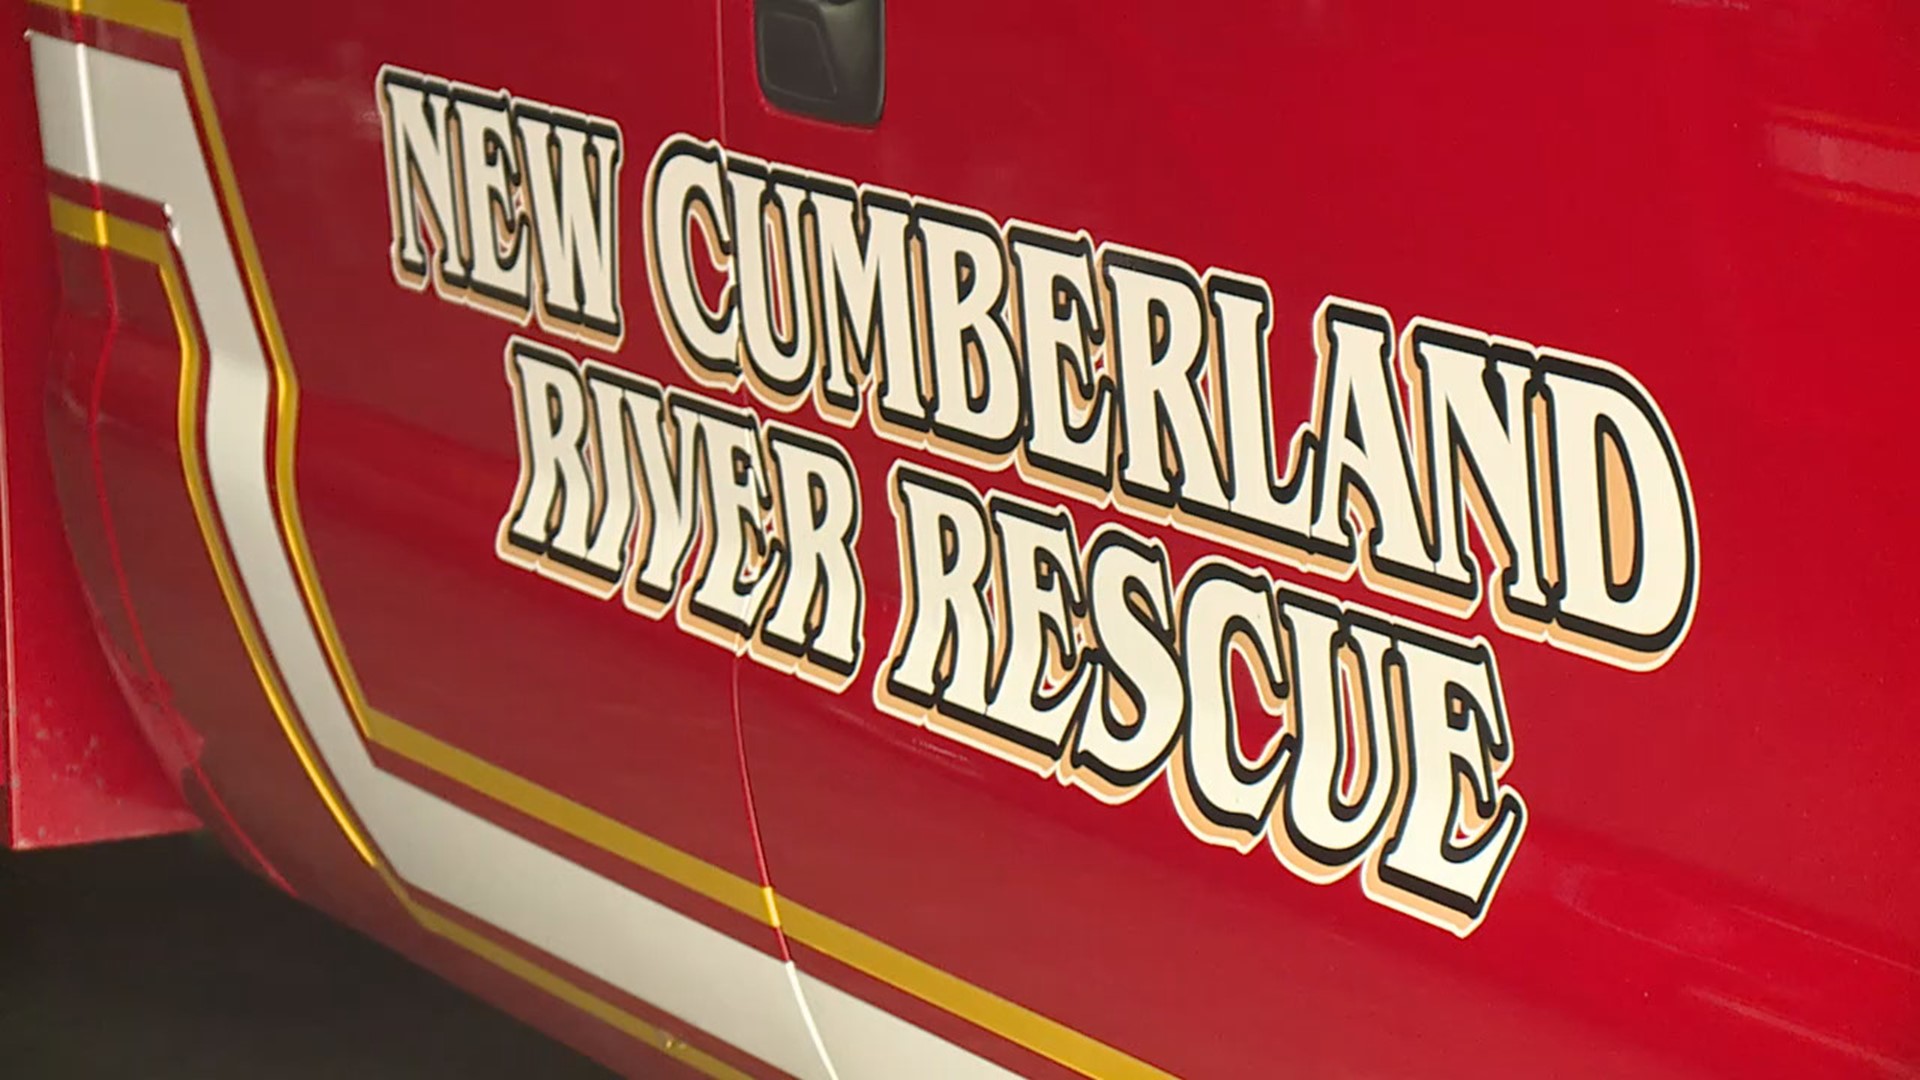 A local rescue agency in Pennsylvania is ready to help Baltimore first responders if called.